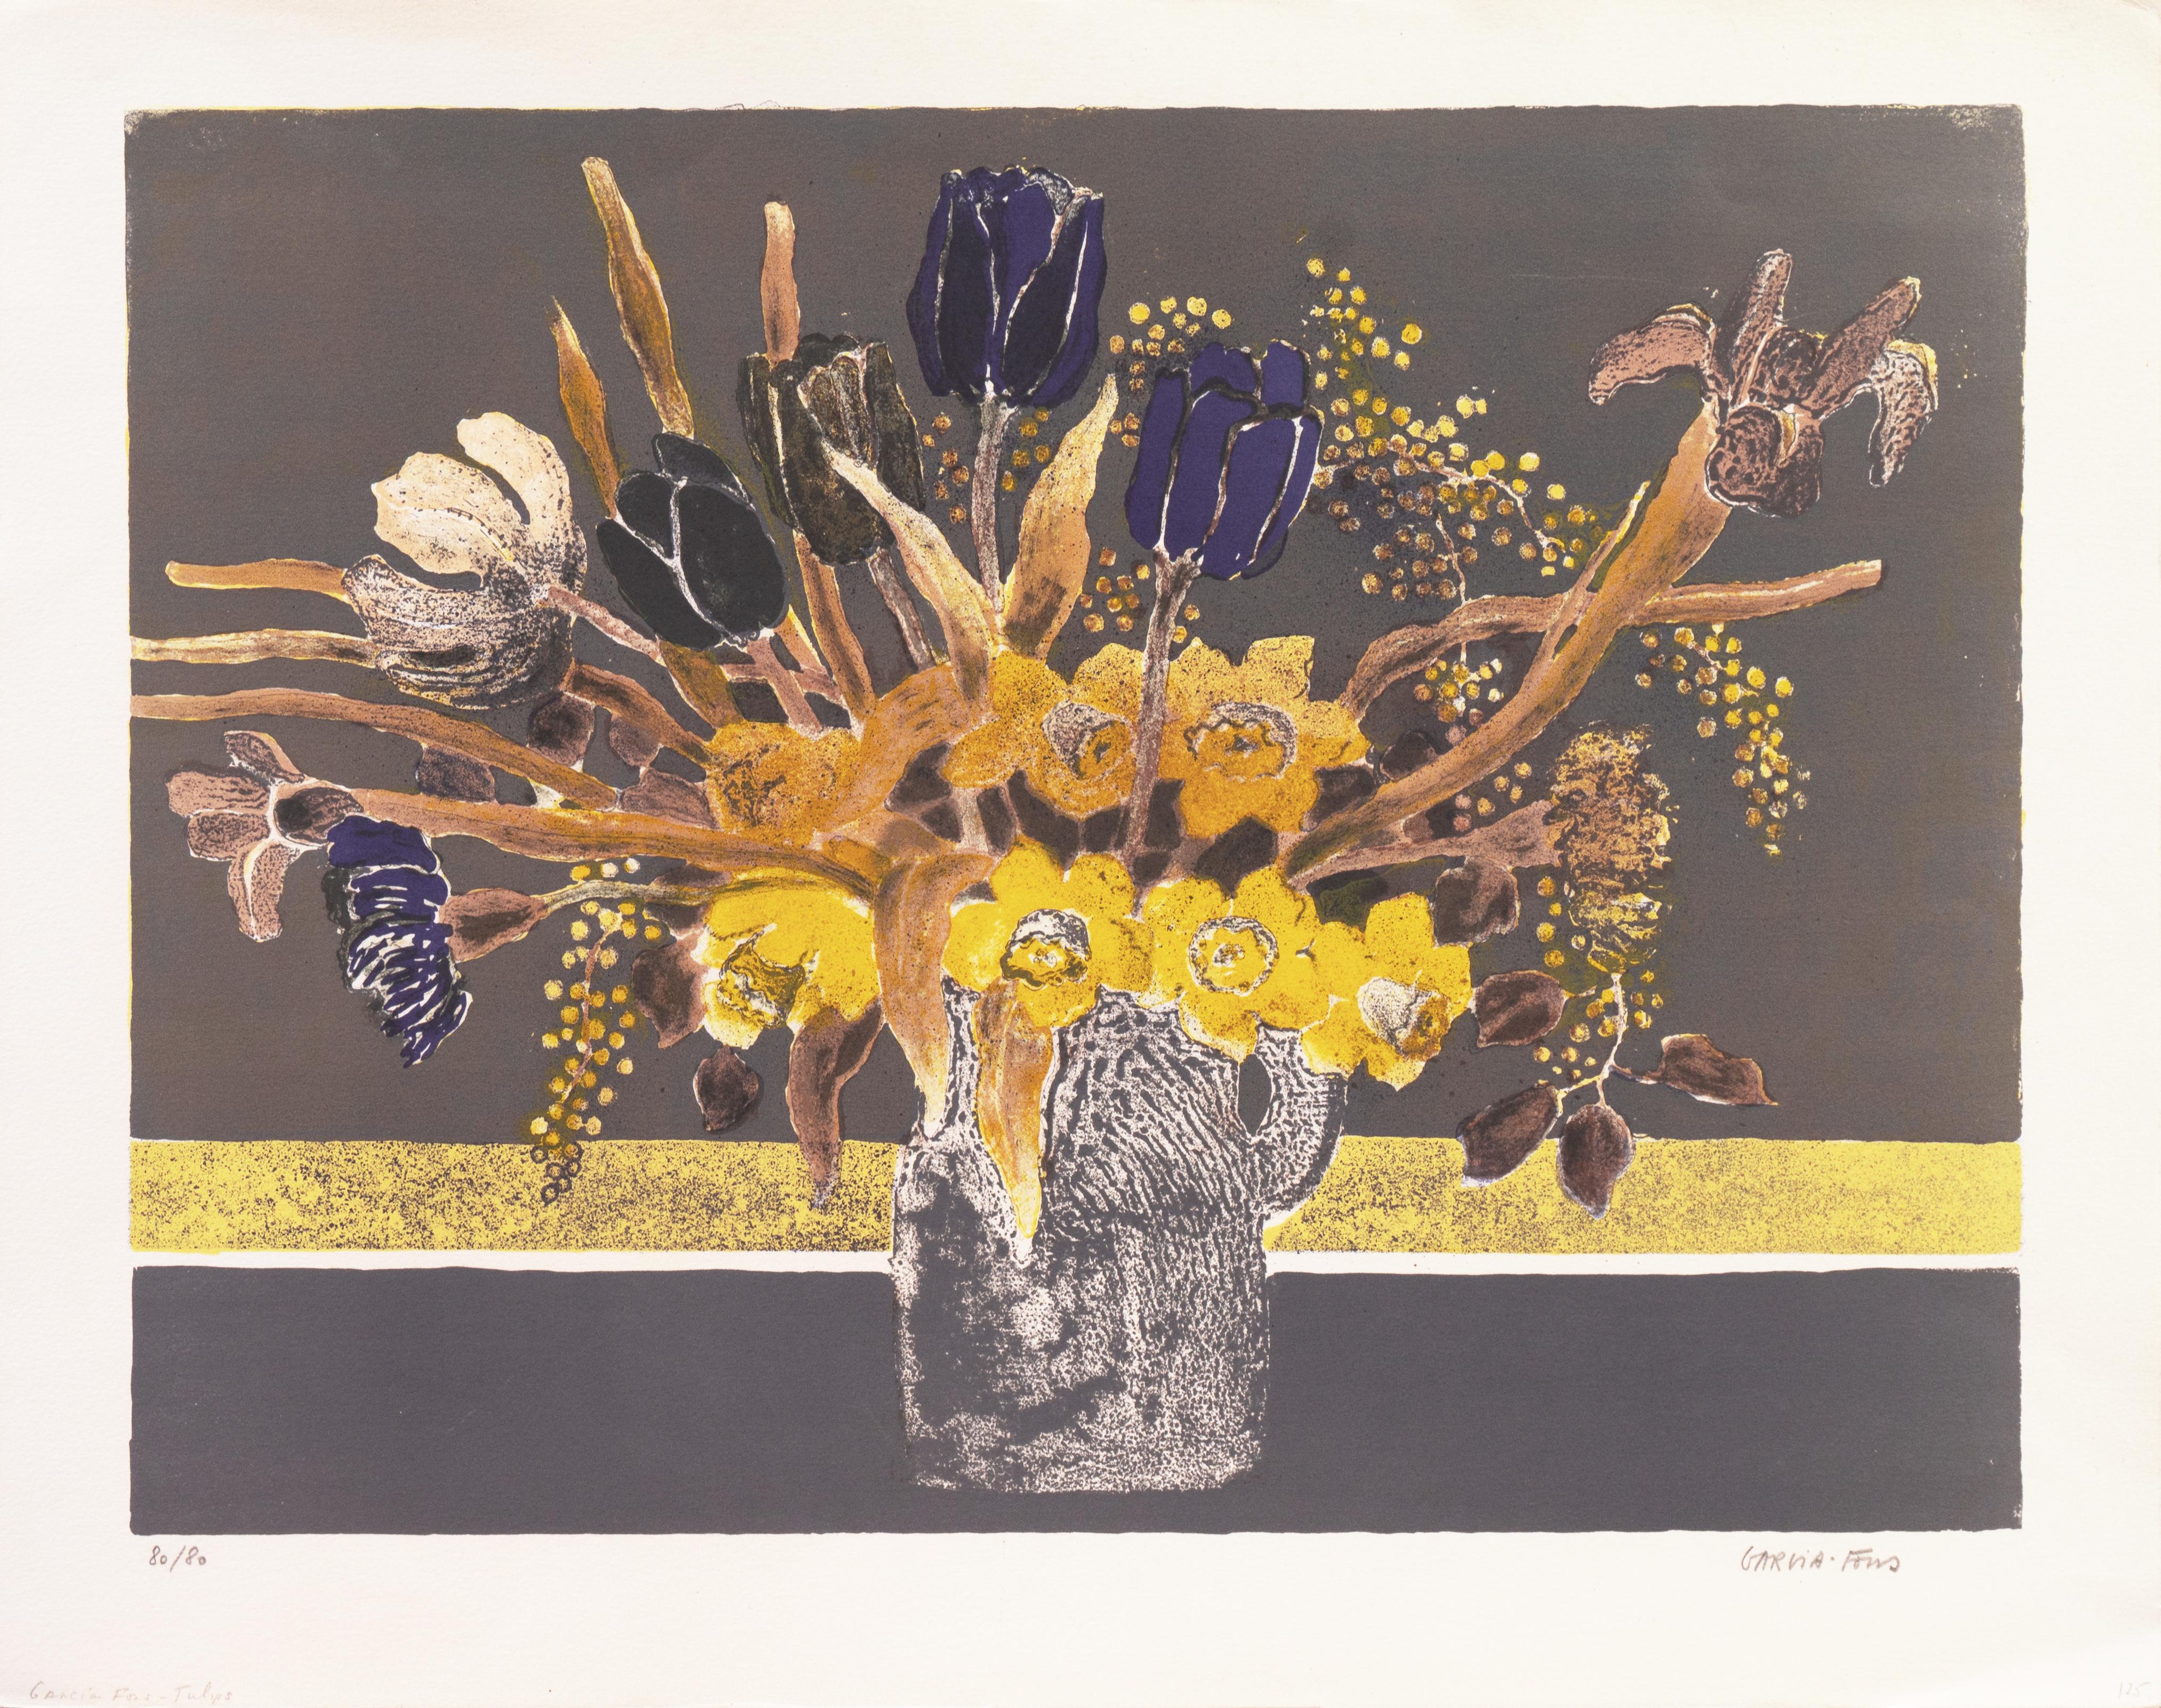 'Still Life of Tulips and Orchids', Academie Chaumiere, MAM Paris, Benezit - Print by Pierre Garcia Fons